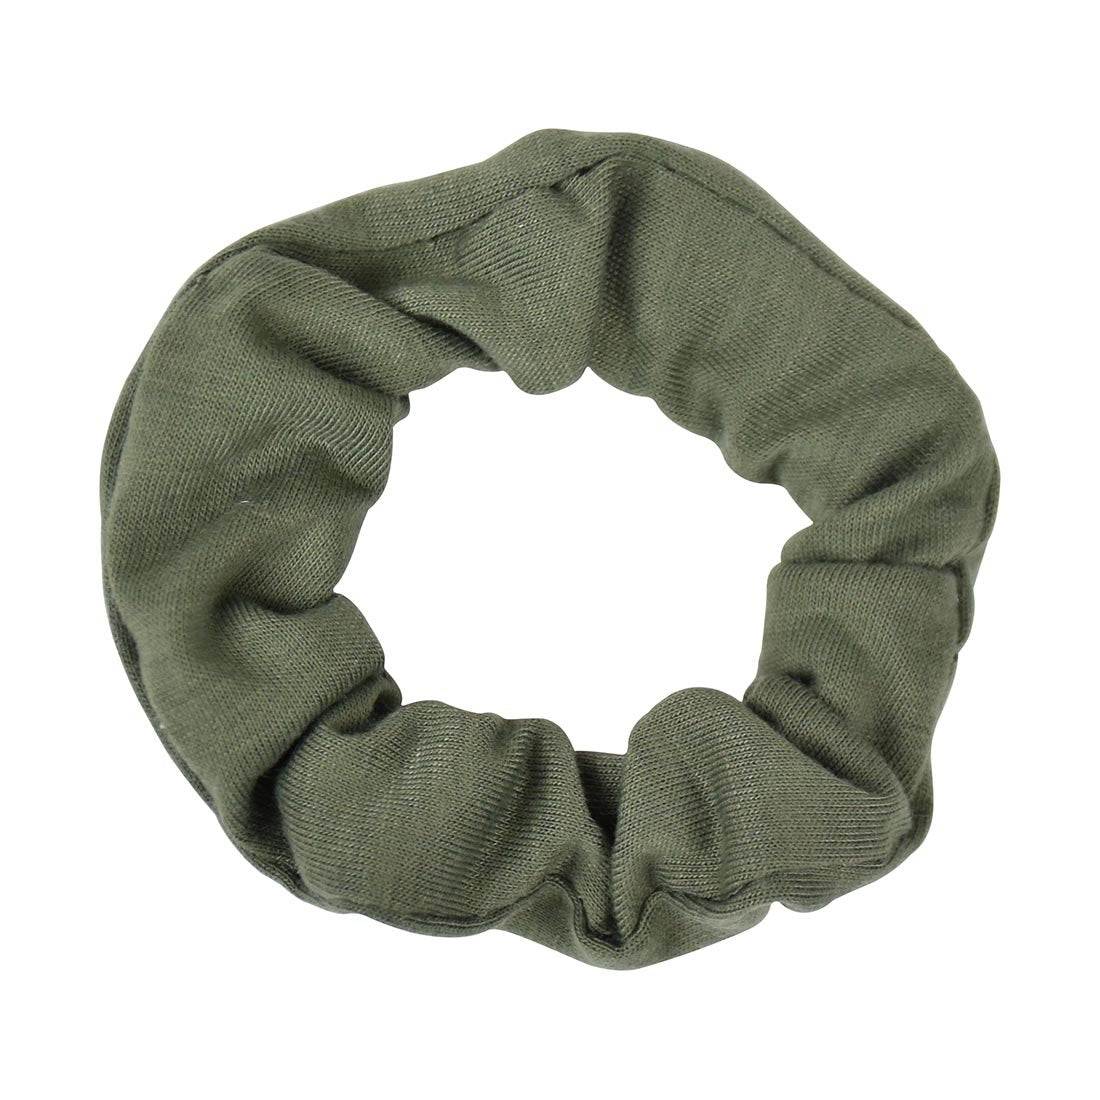 Small Scrunchies Cotton Hair Bobble - Set of 3 - Olive Green